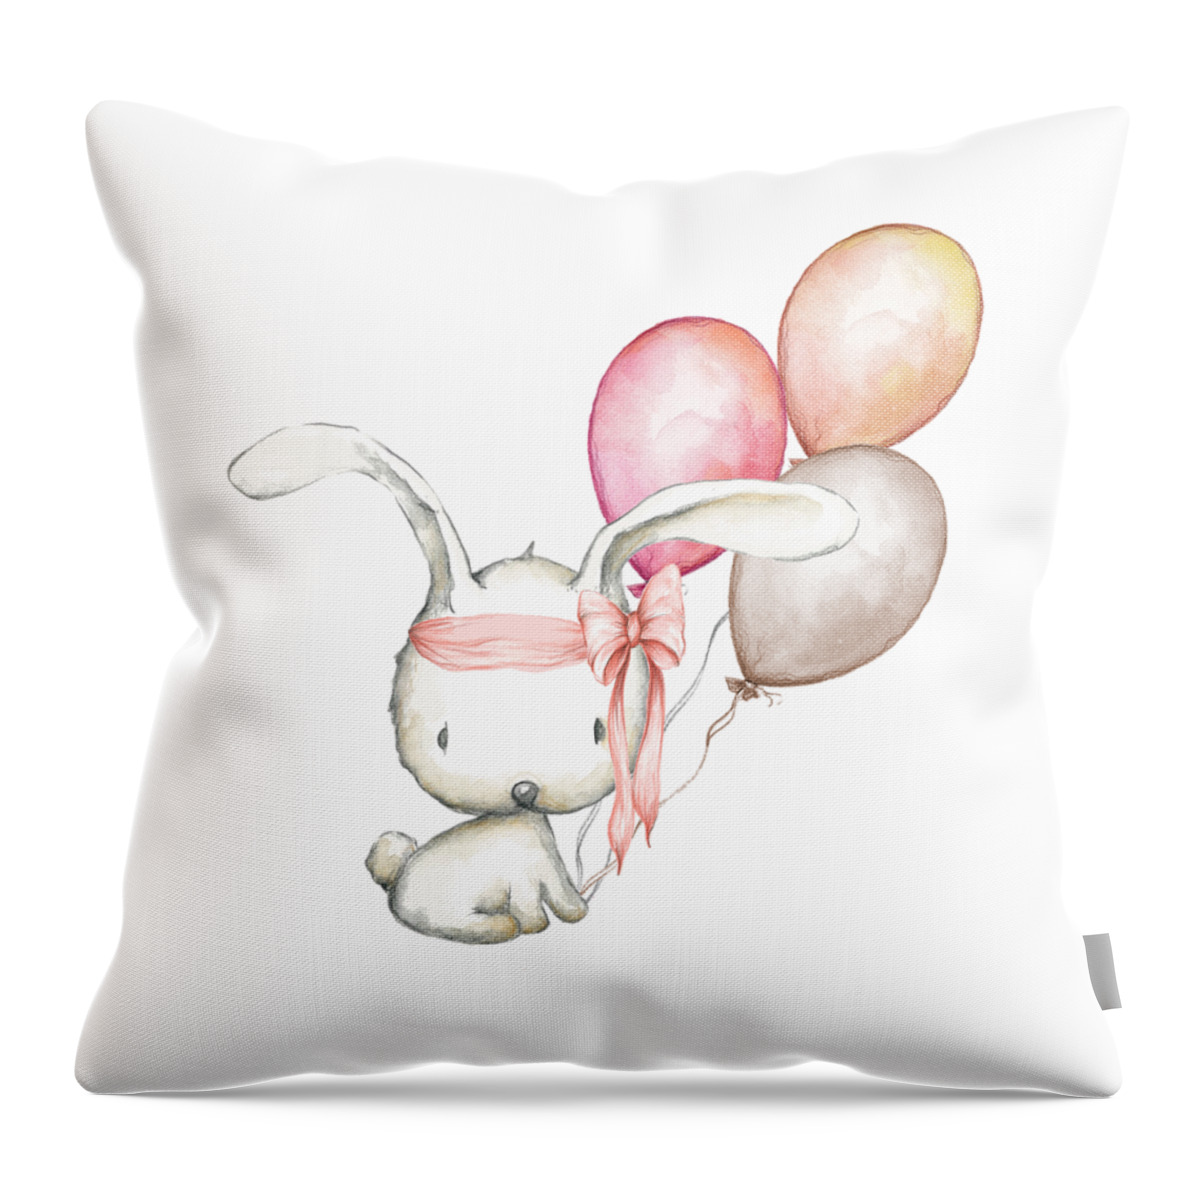 Boho Throw Pillow featuring the digital art Boho Bunny With Balloons by Pink Forest Cafe